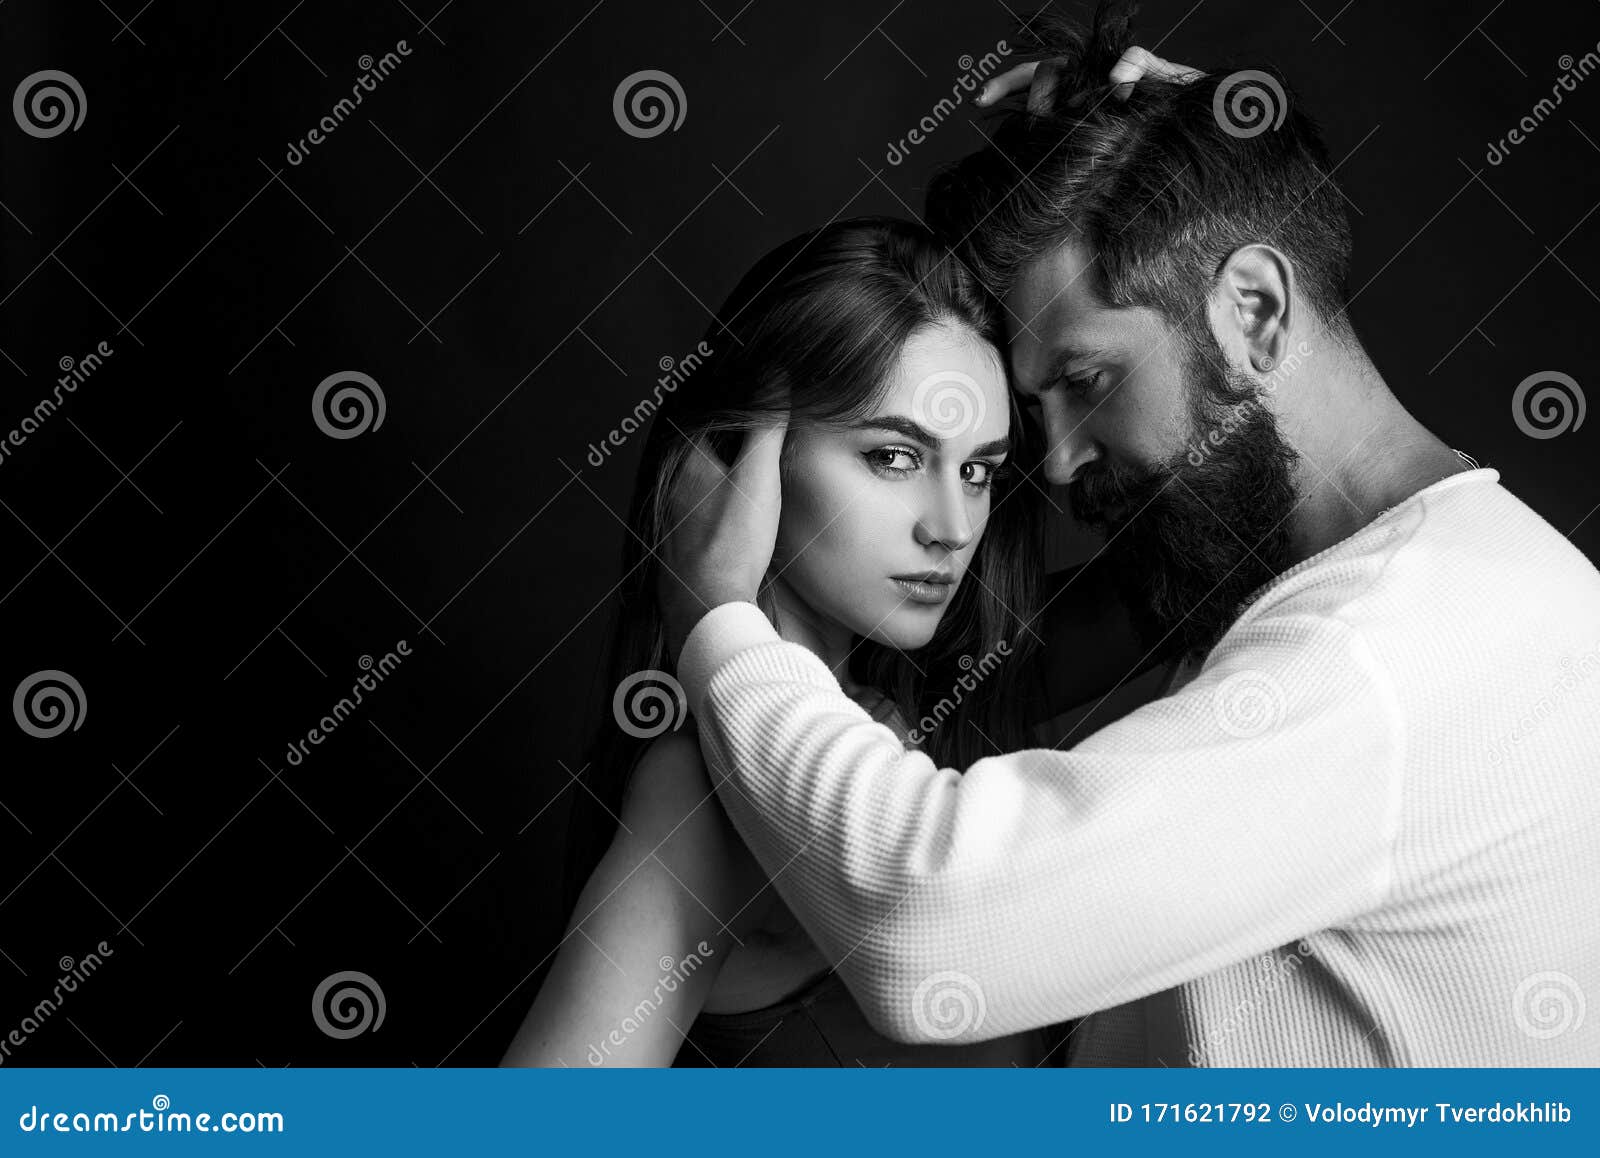 Passionate Man Gently Kissing Beautiful Woman with Desire